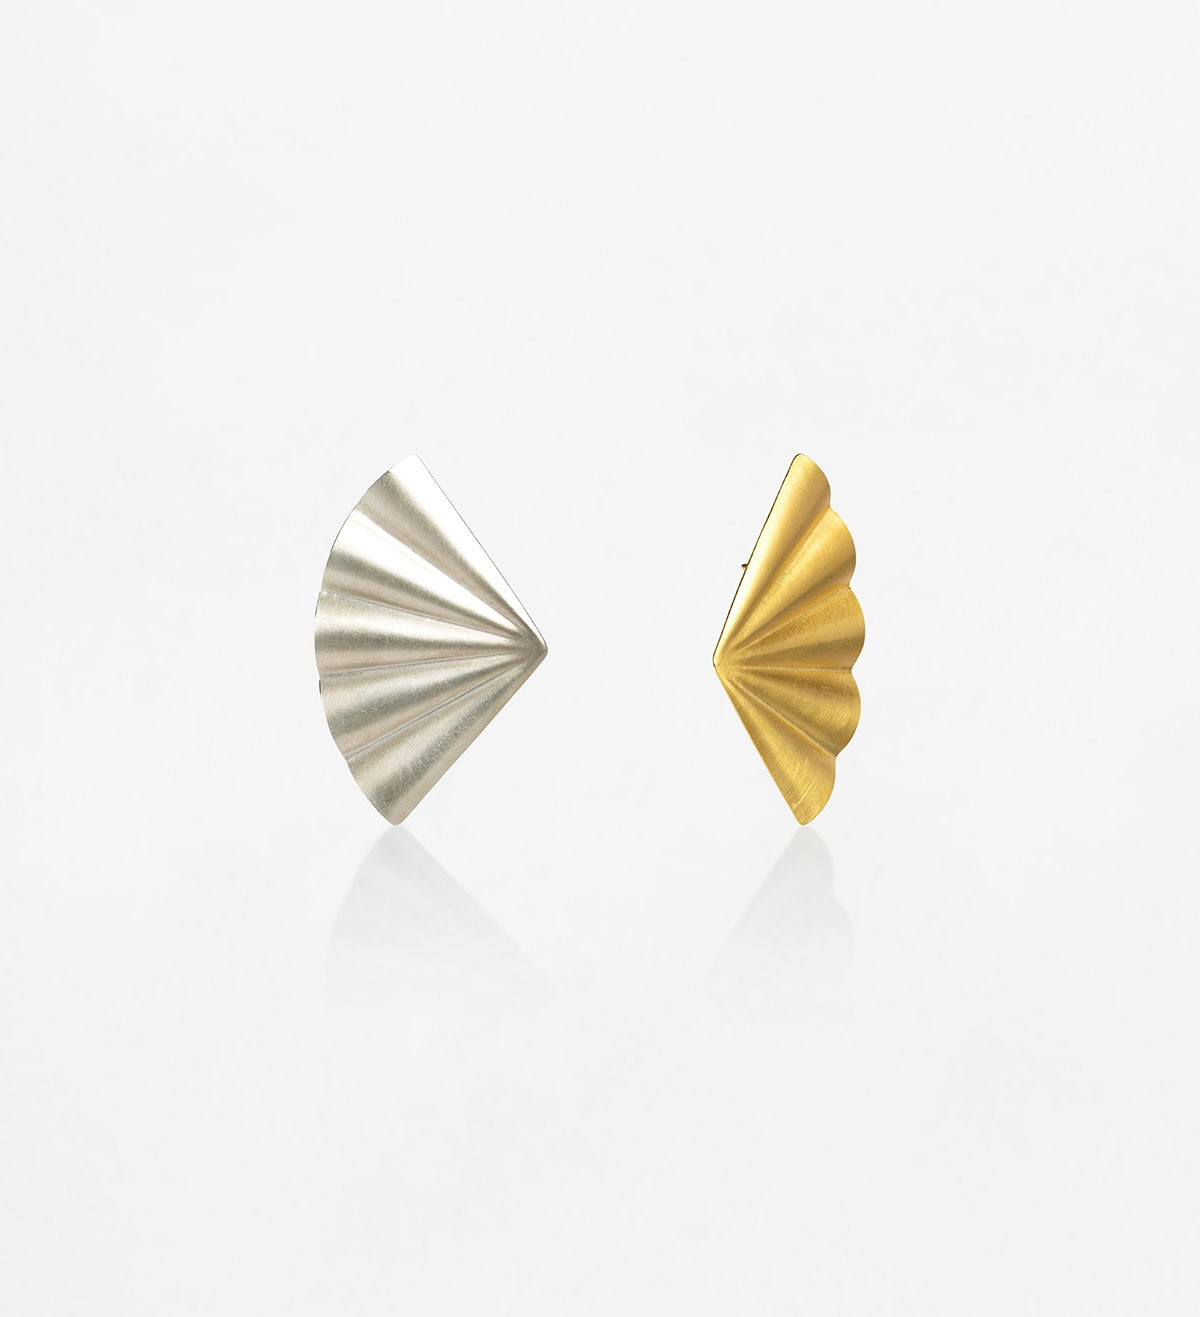 18k gold and silver earrings Maiko 43mm